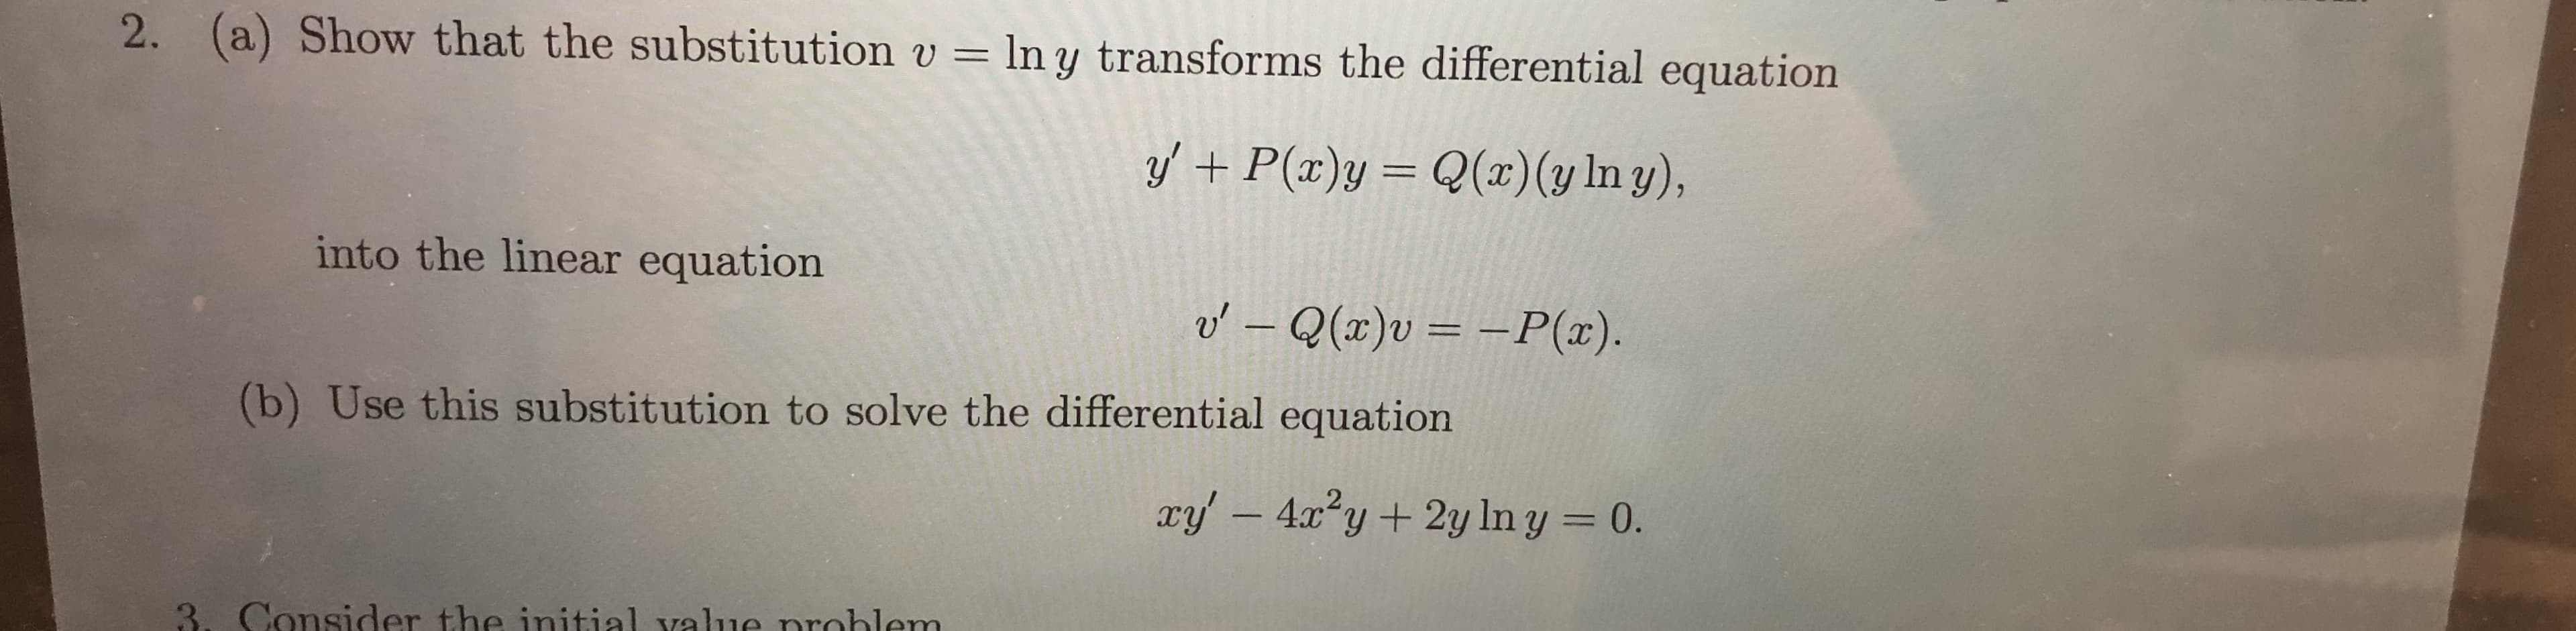 2. (a) Show that the substitution v
ln y transforms the differential equation
Q(x) (y In y),
yP(x)y
into the linear equation
o'- Q(x)v = -P(x)
(b) Use this substitution to solve the differential equation
ry' -4xy2y In y = 0.
3. Consider the initial value nroblem
